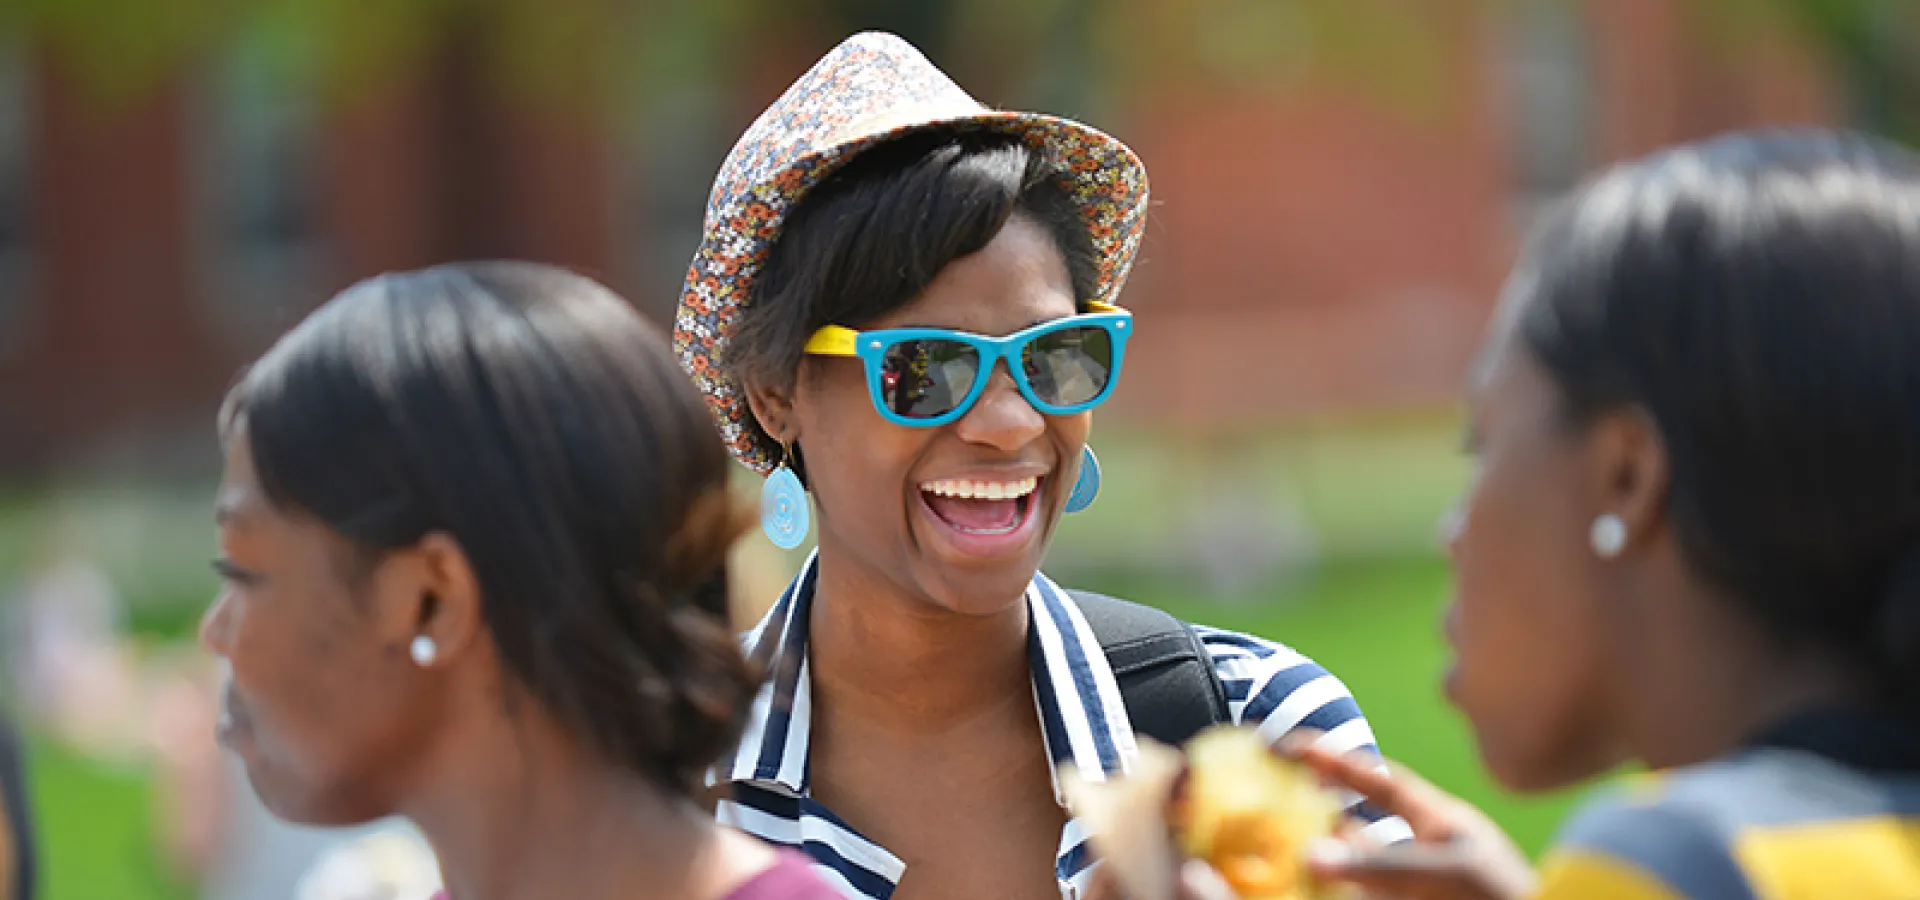 Student in a summer hat and sunglasses